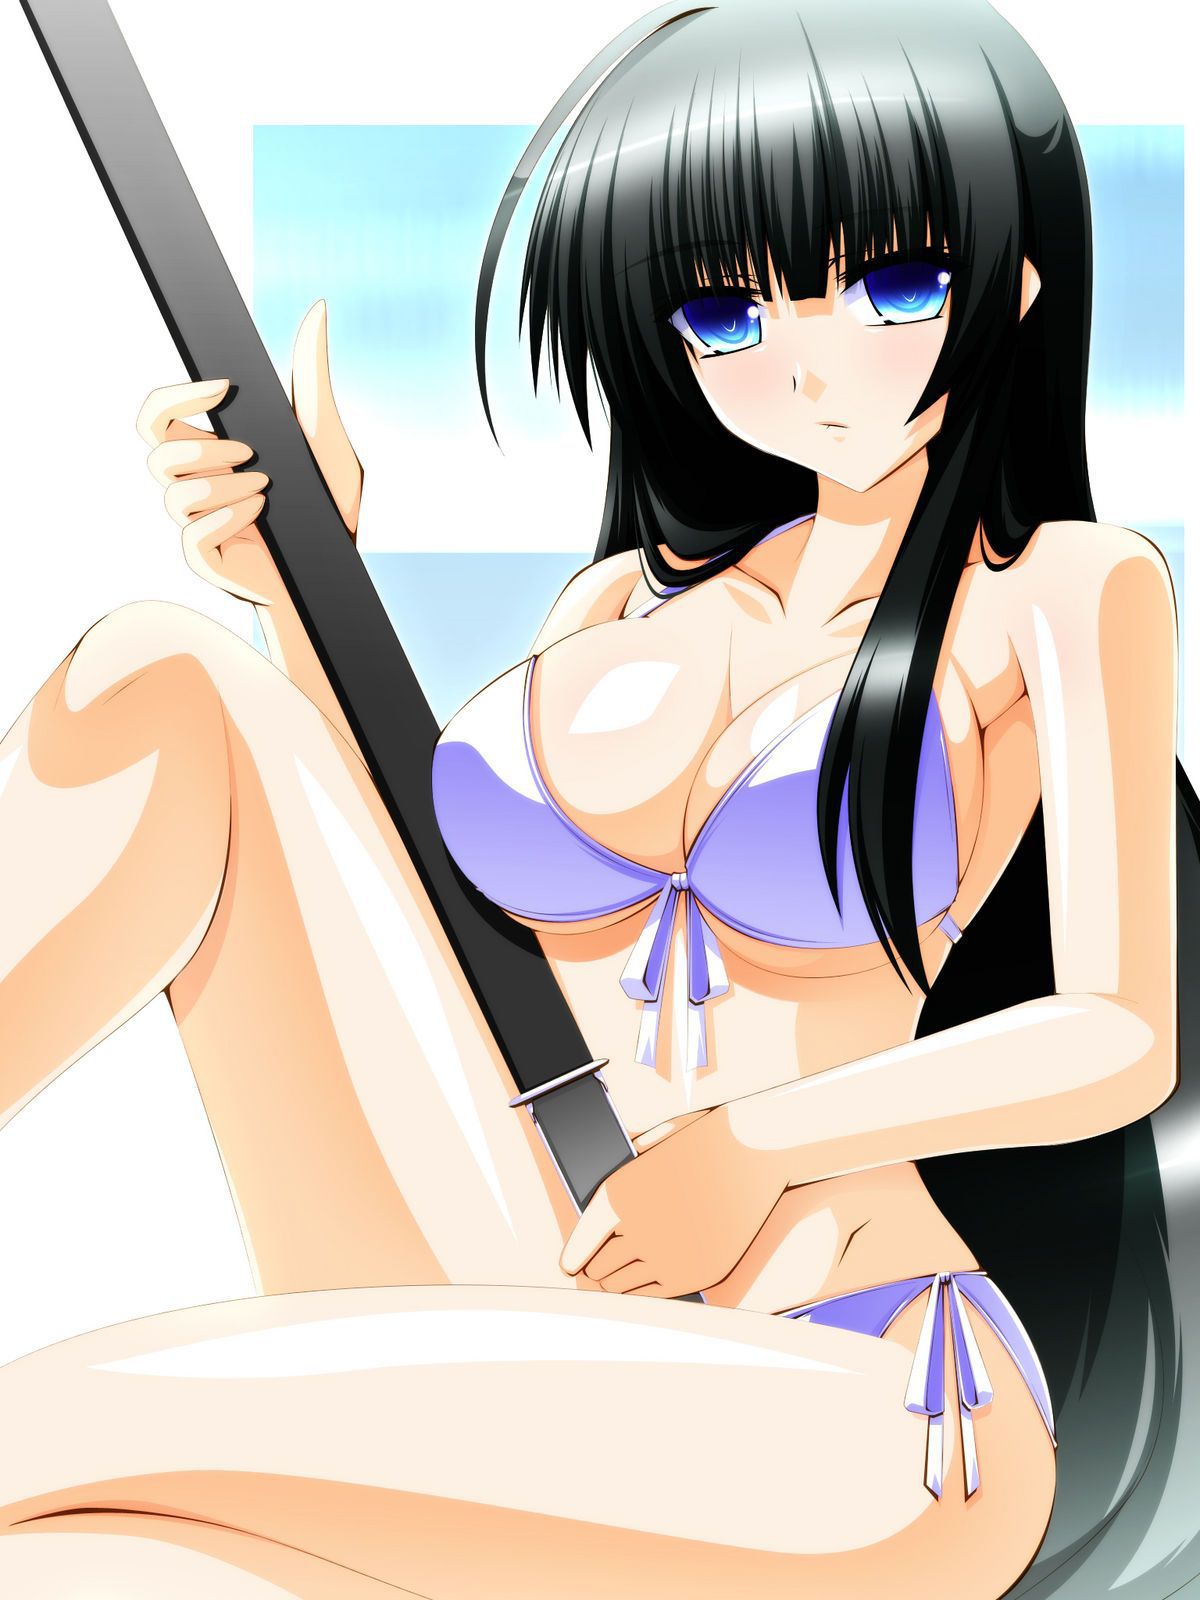 [60 pictures] from turbulent Kagura Ikaruga erotic pictures! 16